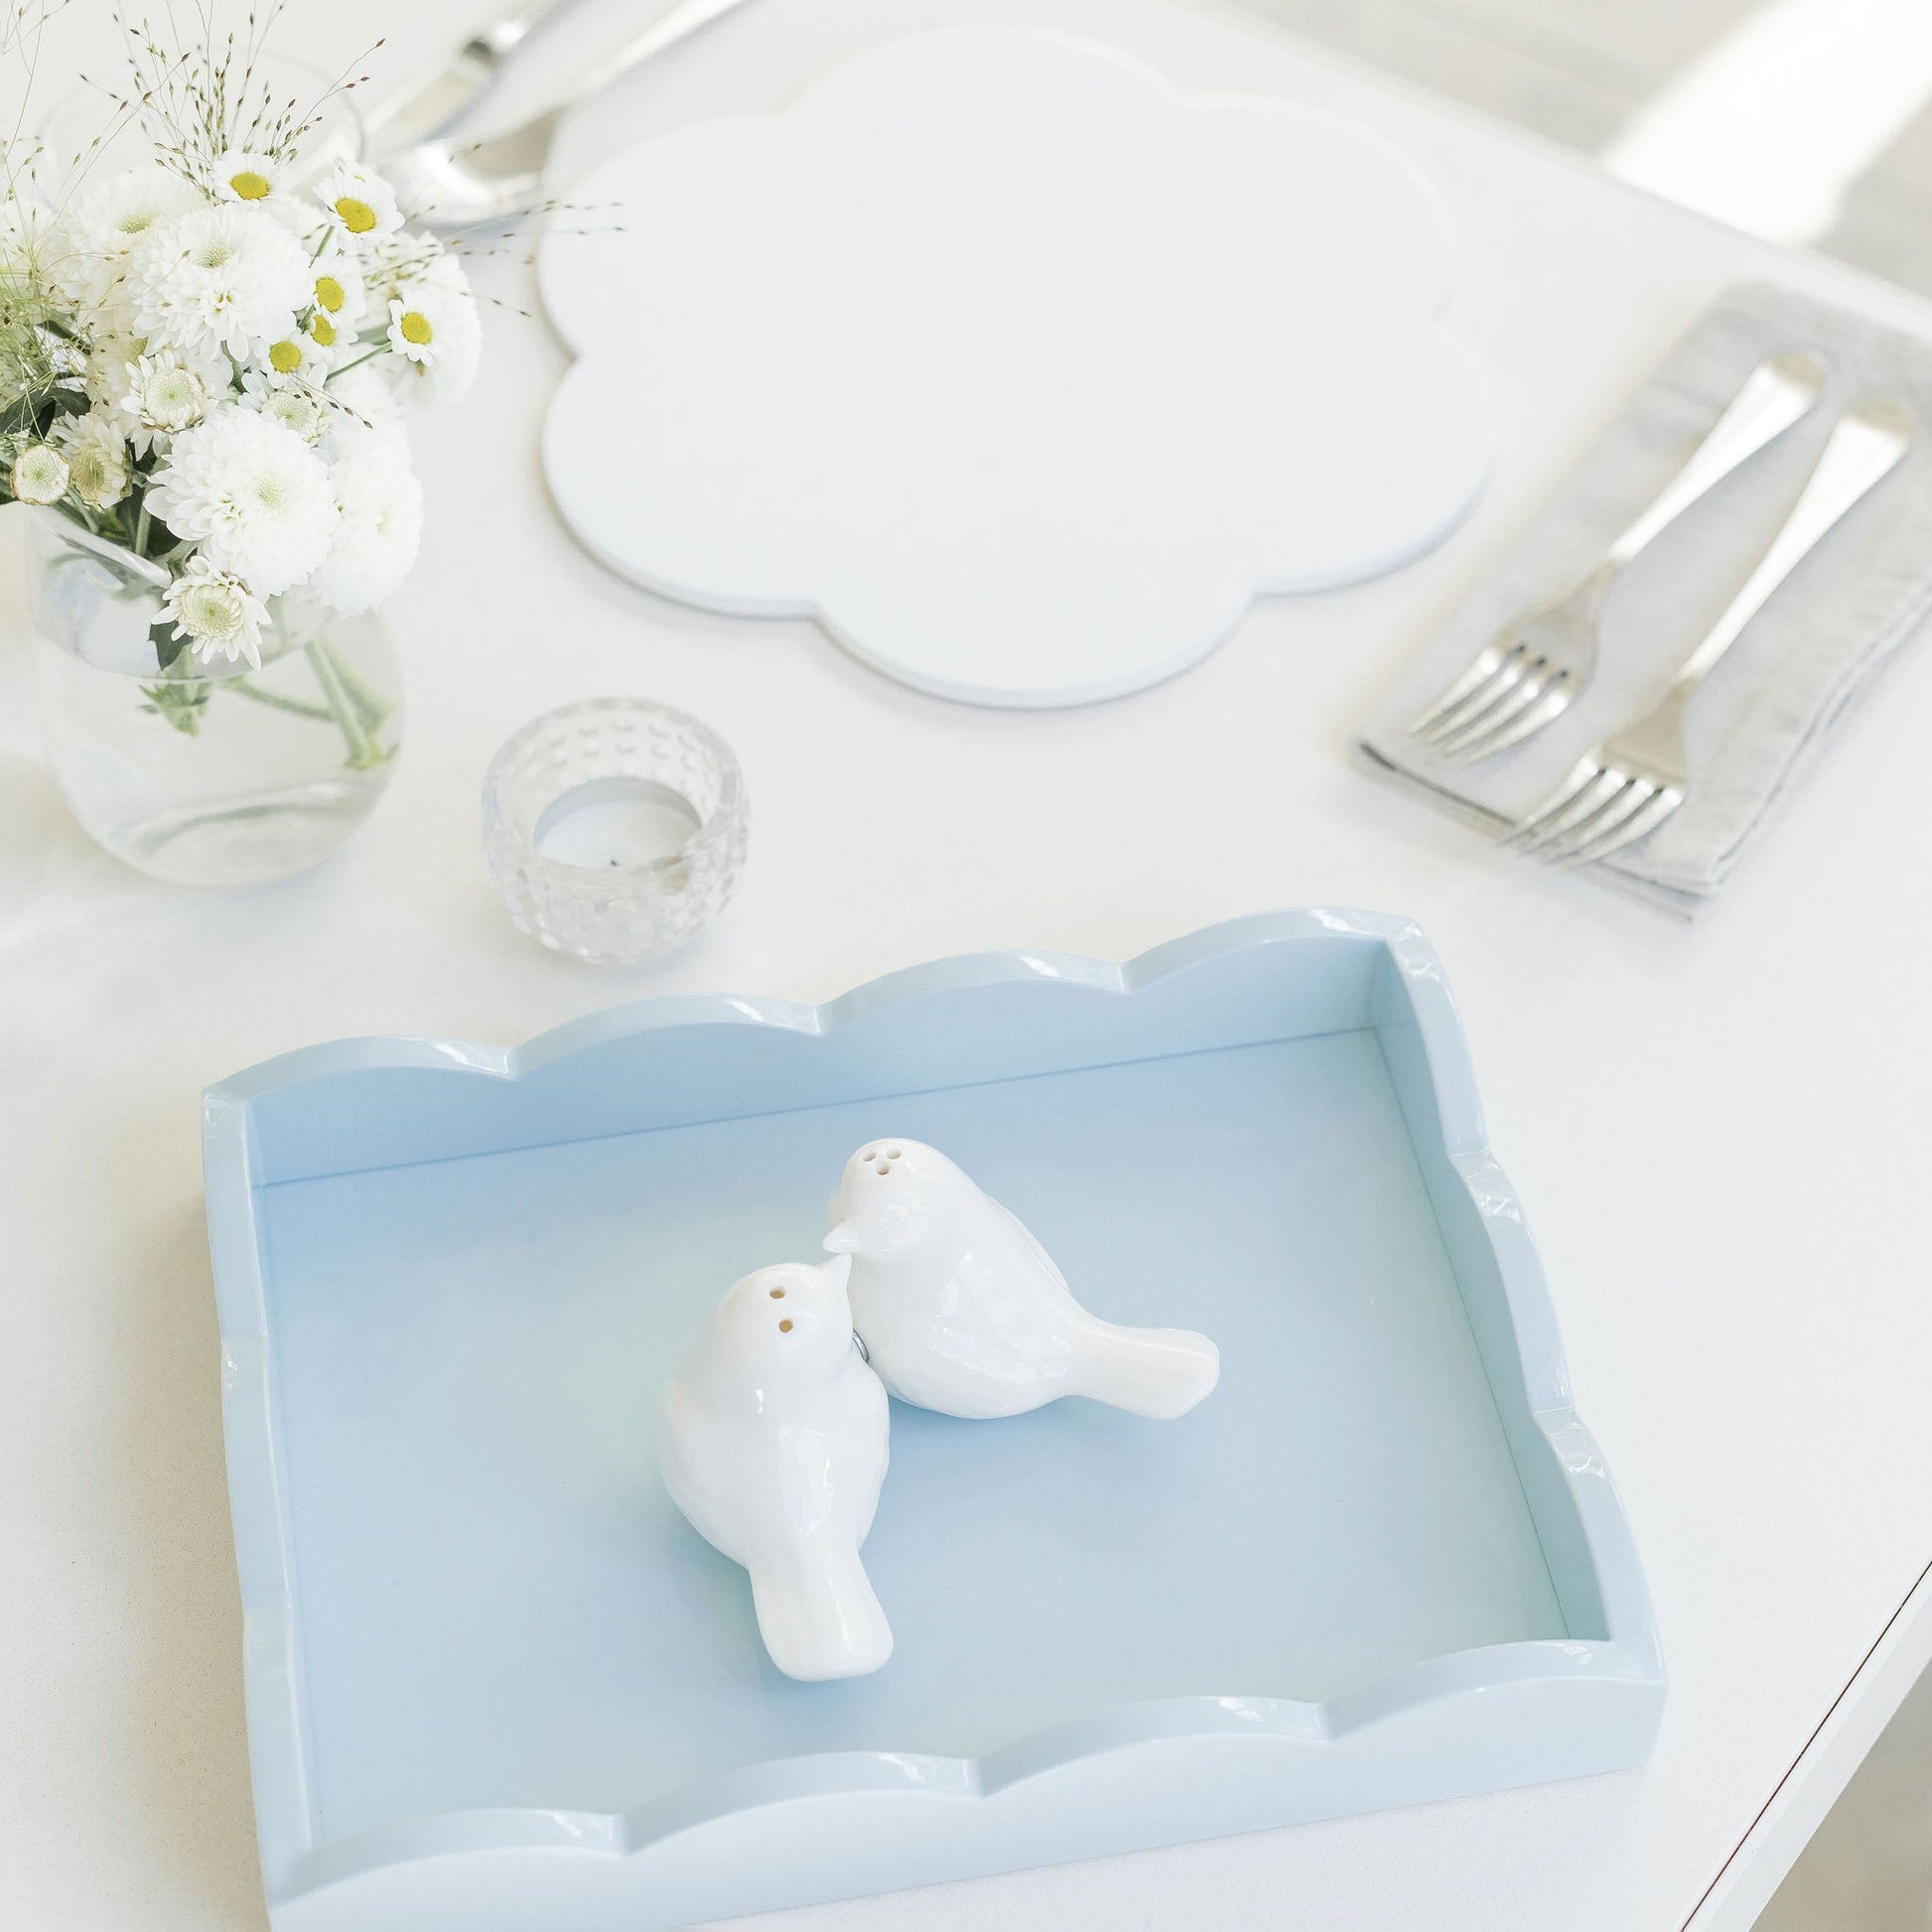 Small, pale blue scalloped edge tray displaying trinkets